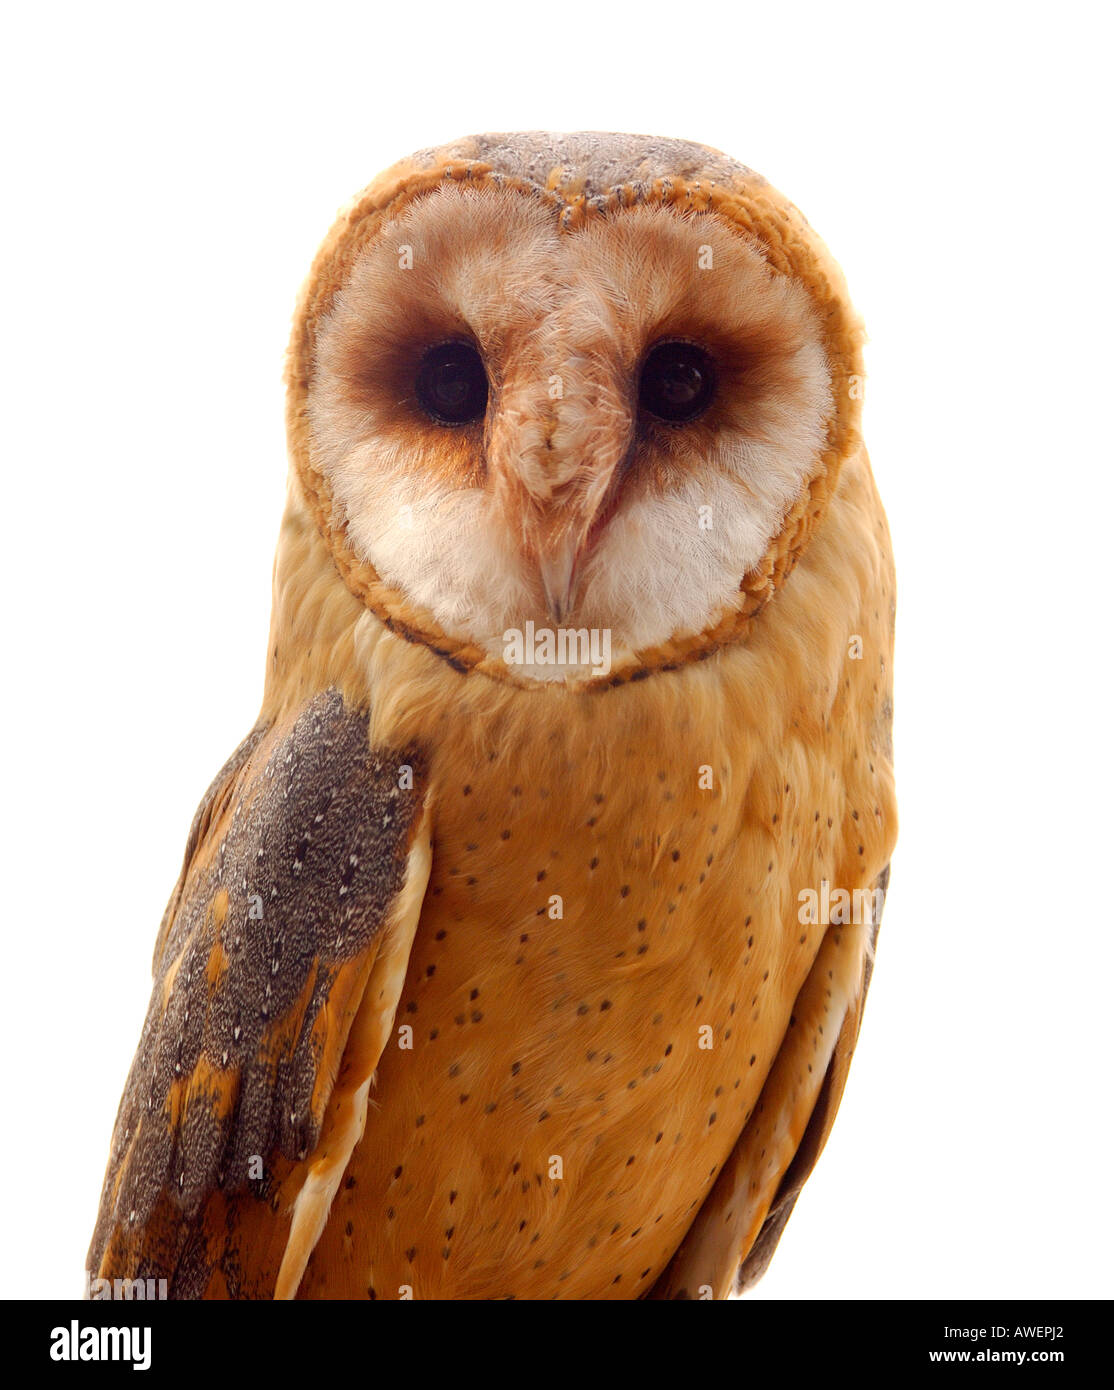 Contemporary style close up portrait of a European Barn Owl Tyto alba against a plain stark white background Stock Photo